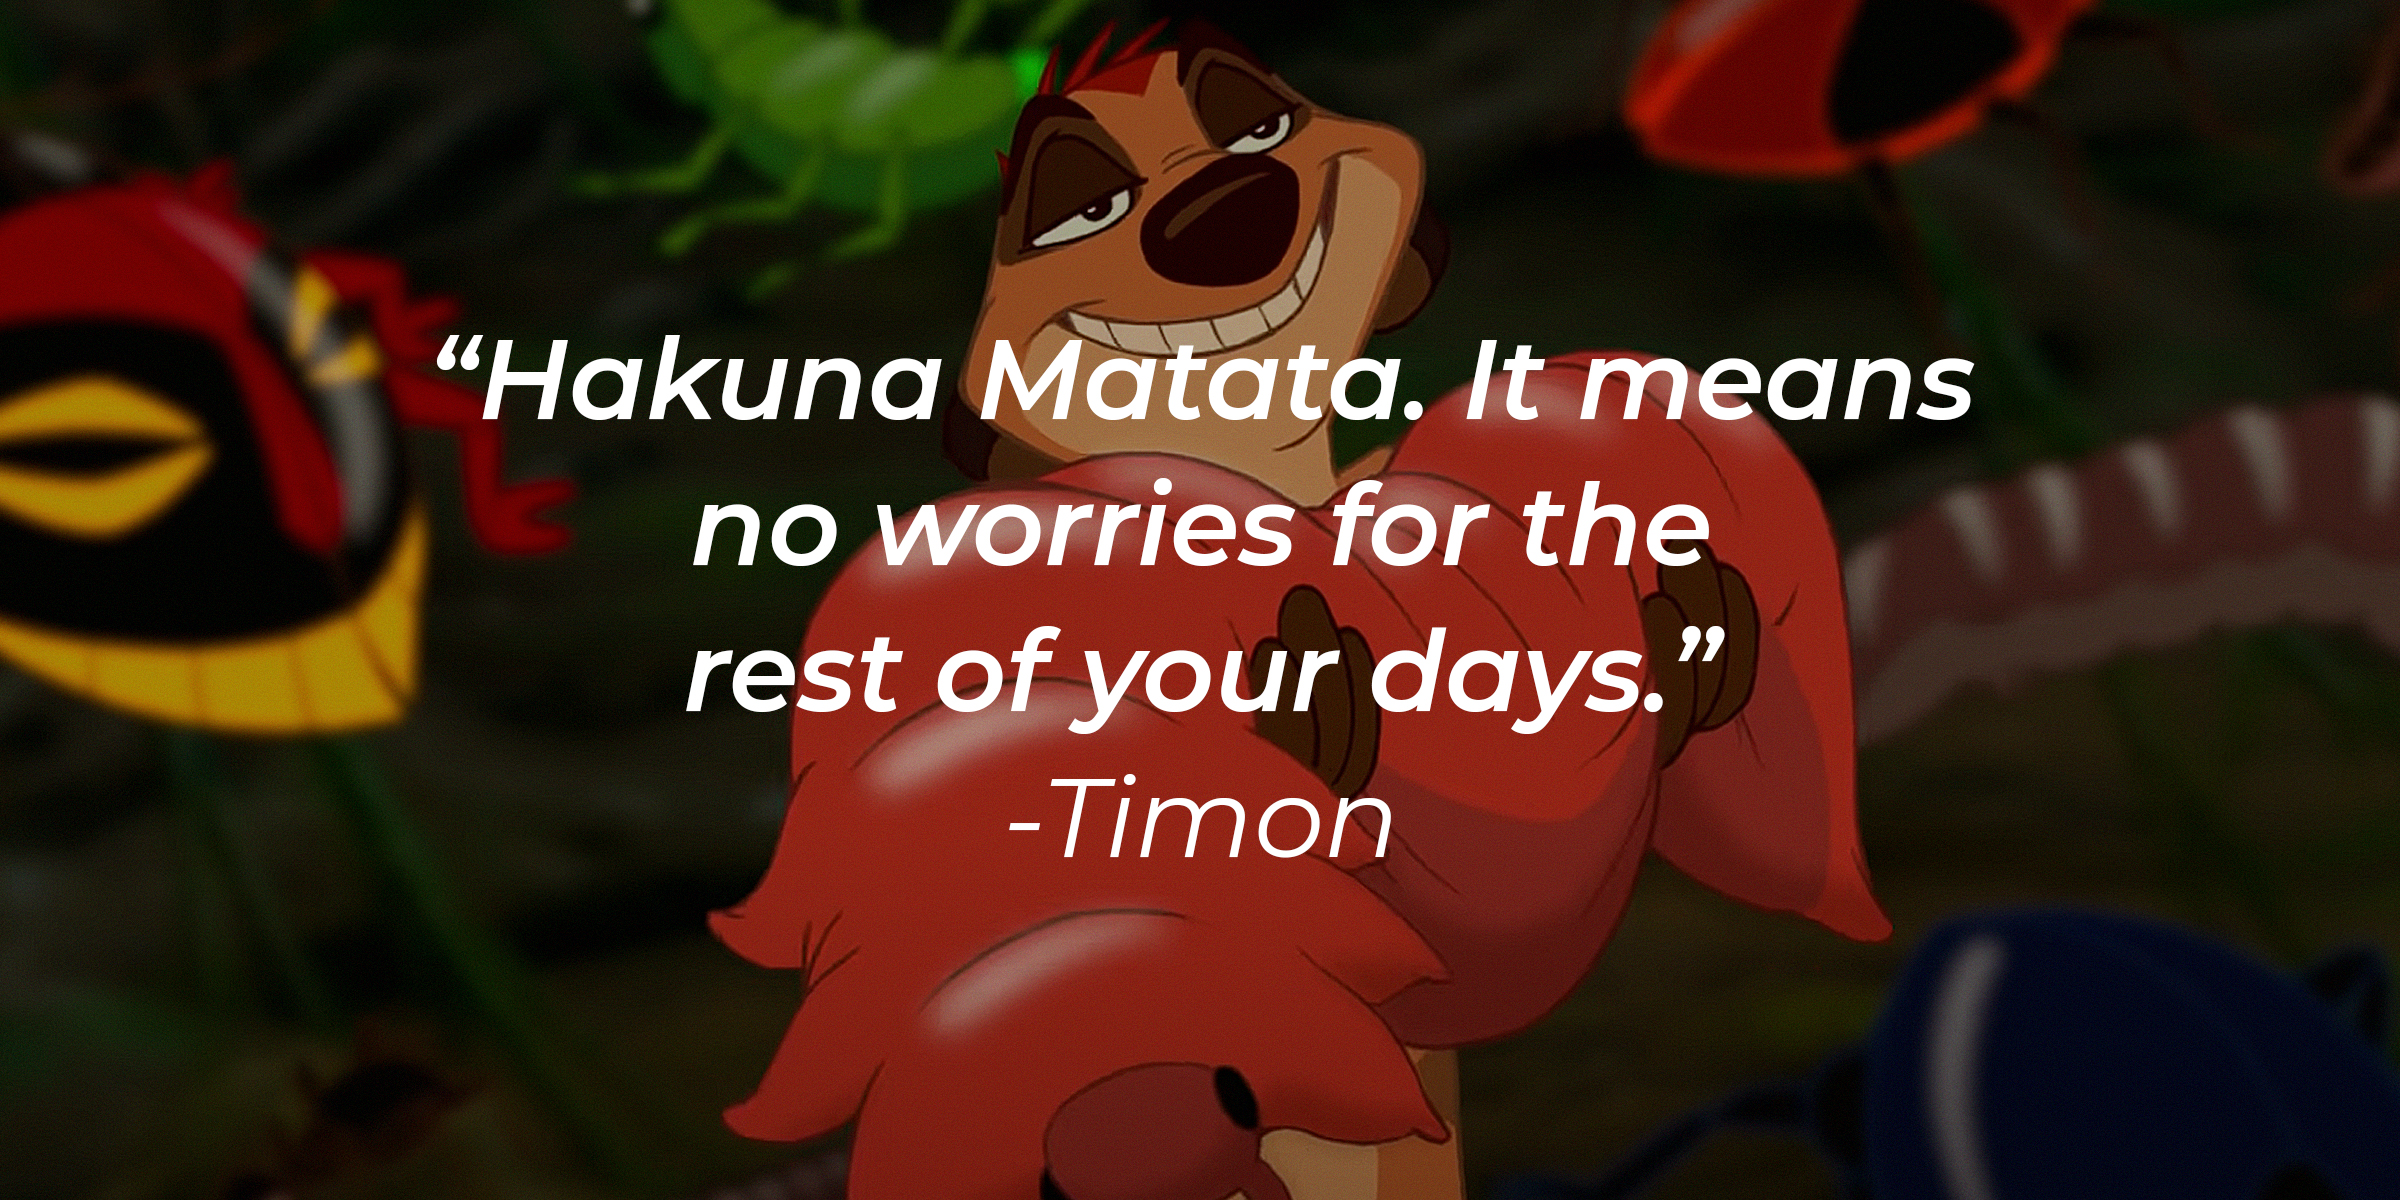 Timon with his quote: “Hakuna Matata. It means no worries for the rest of your days.” | Source: youtube.com/disneyfr